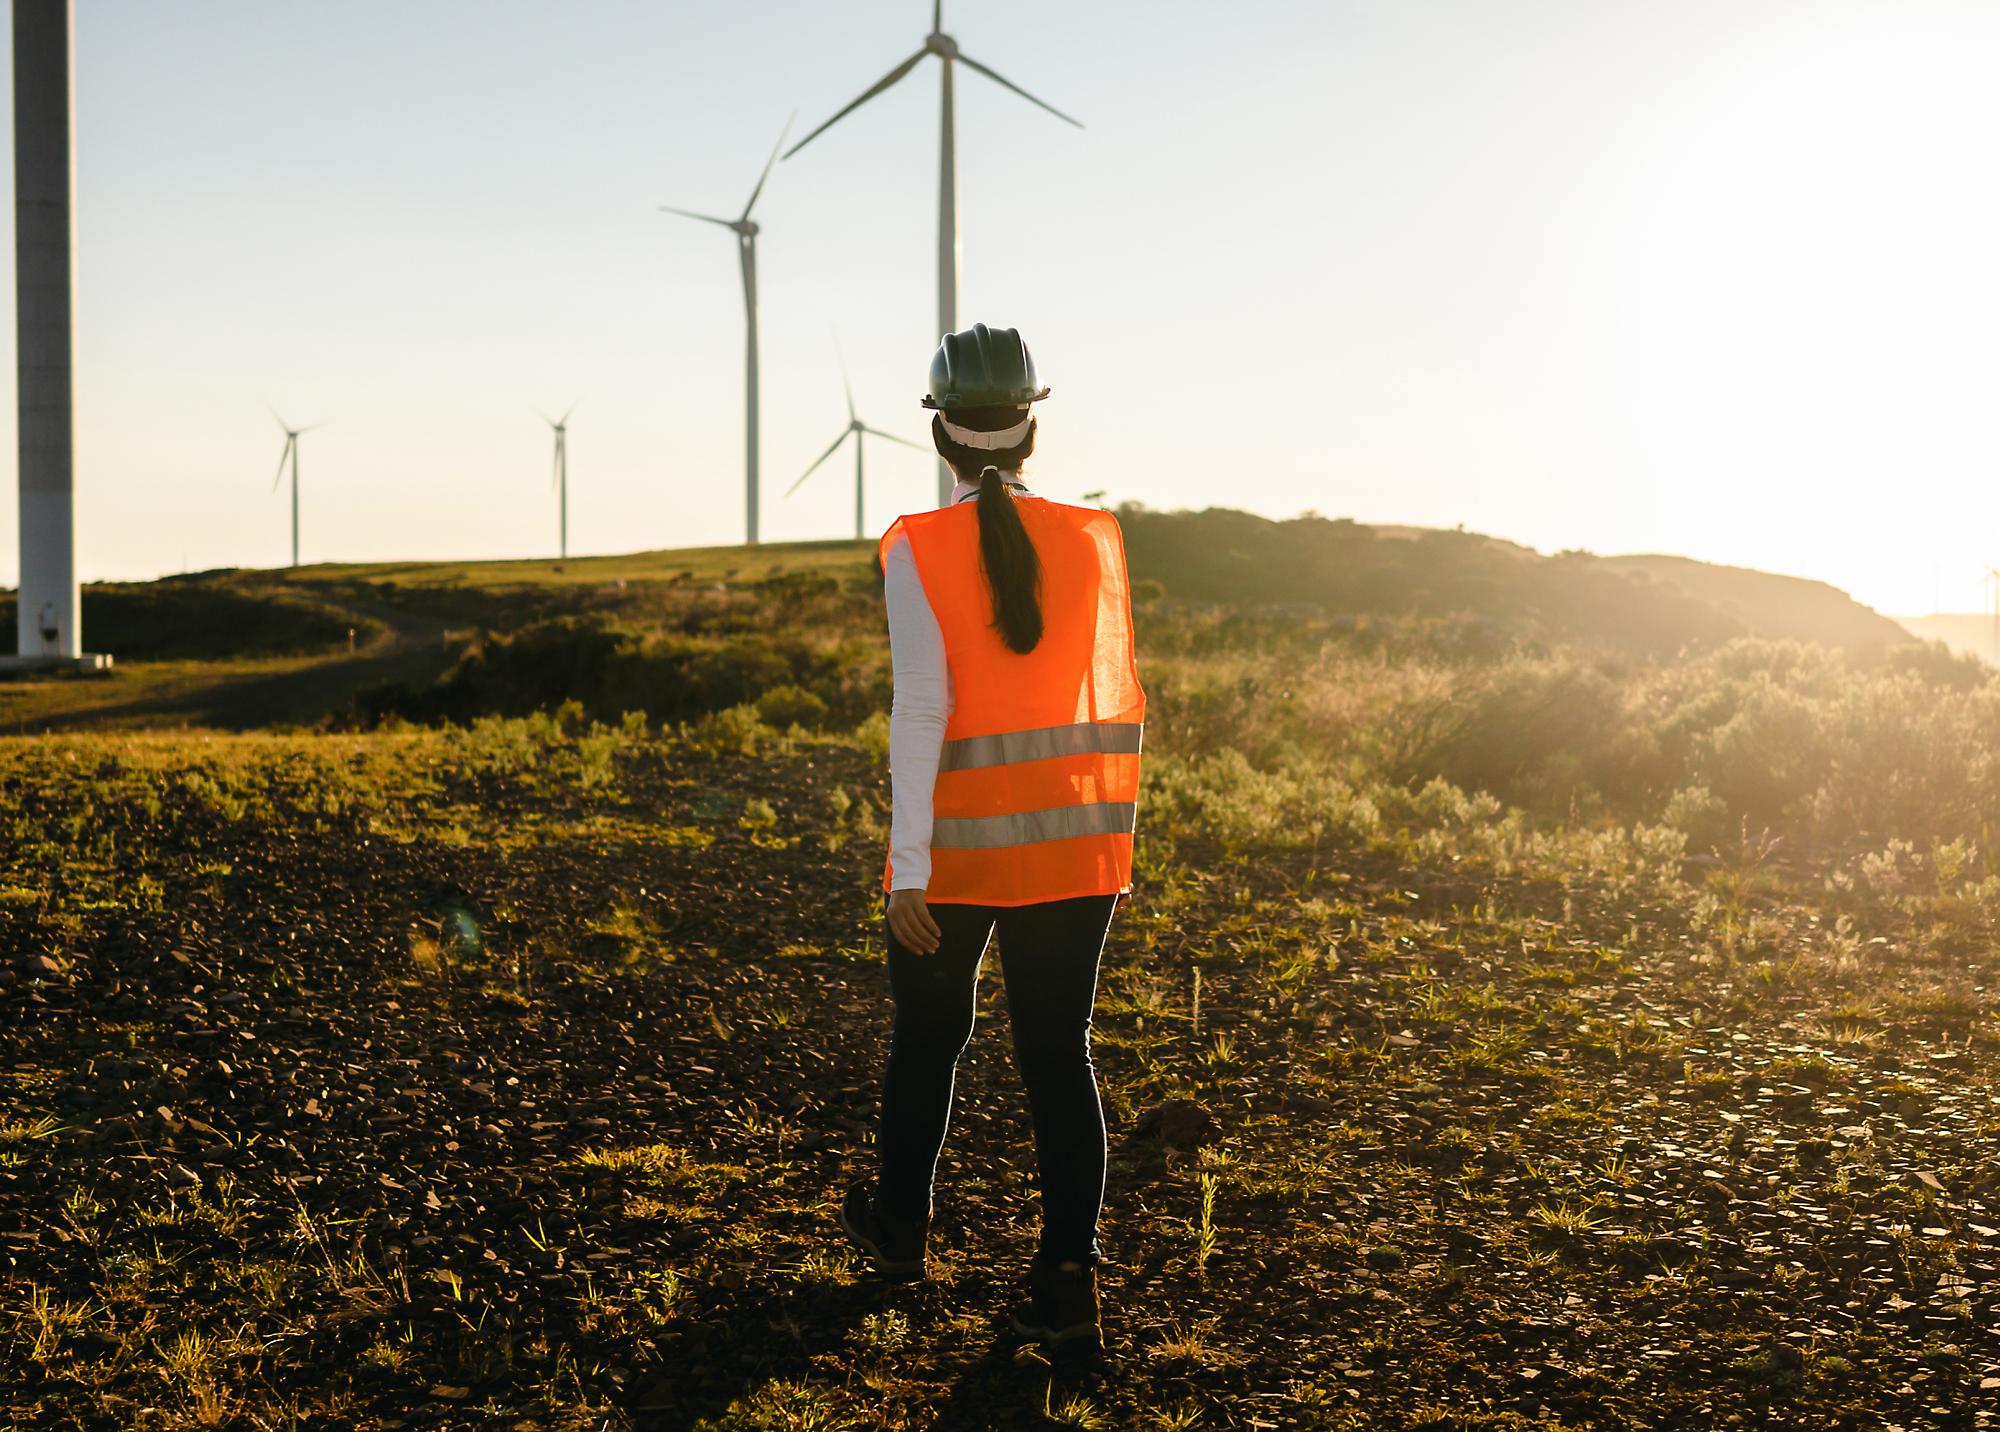 A person wearing an orange safety vest and helmet is walking in a grassy area with wind turbines in the background.